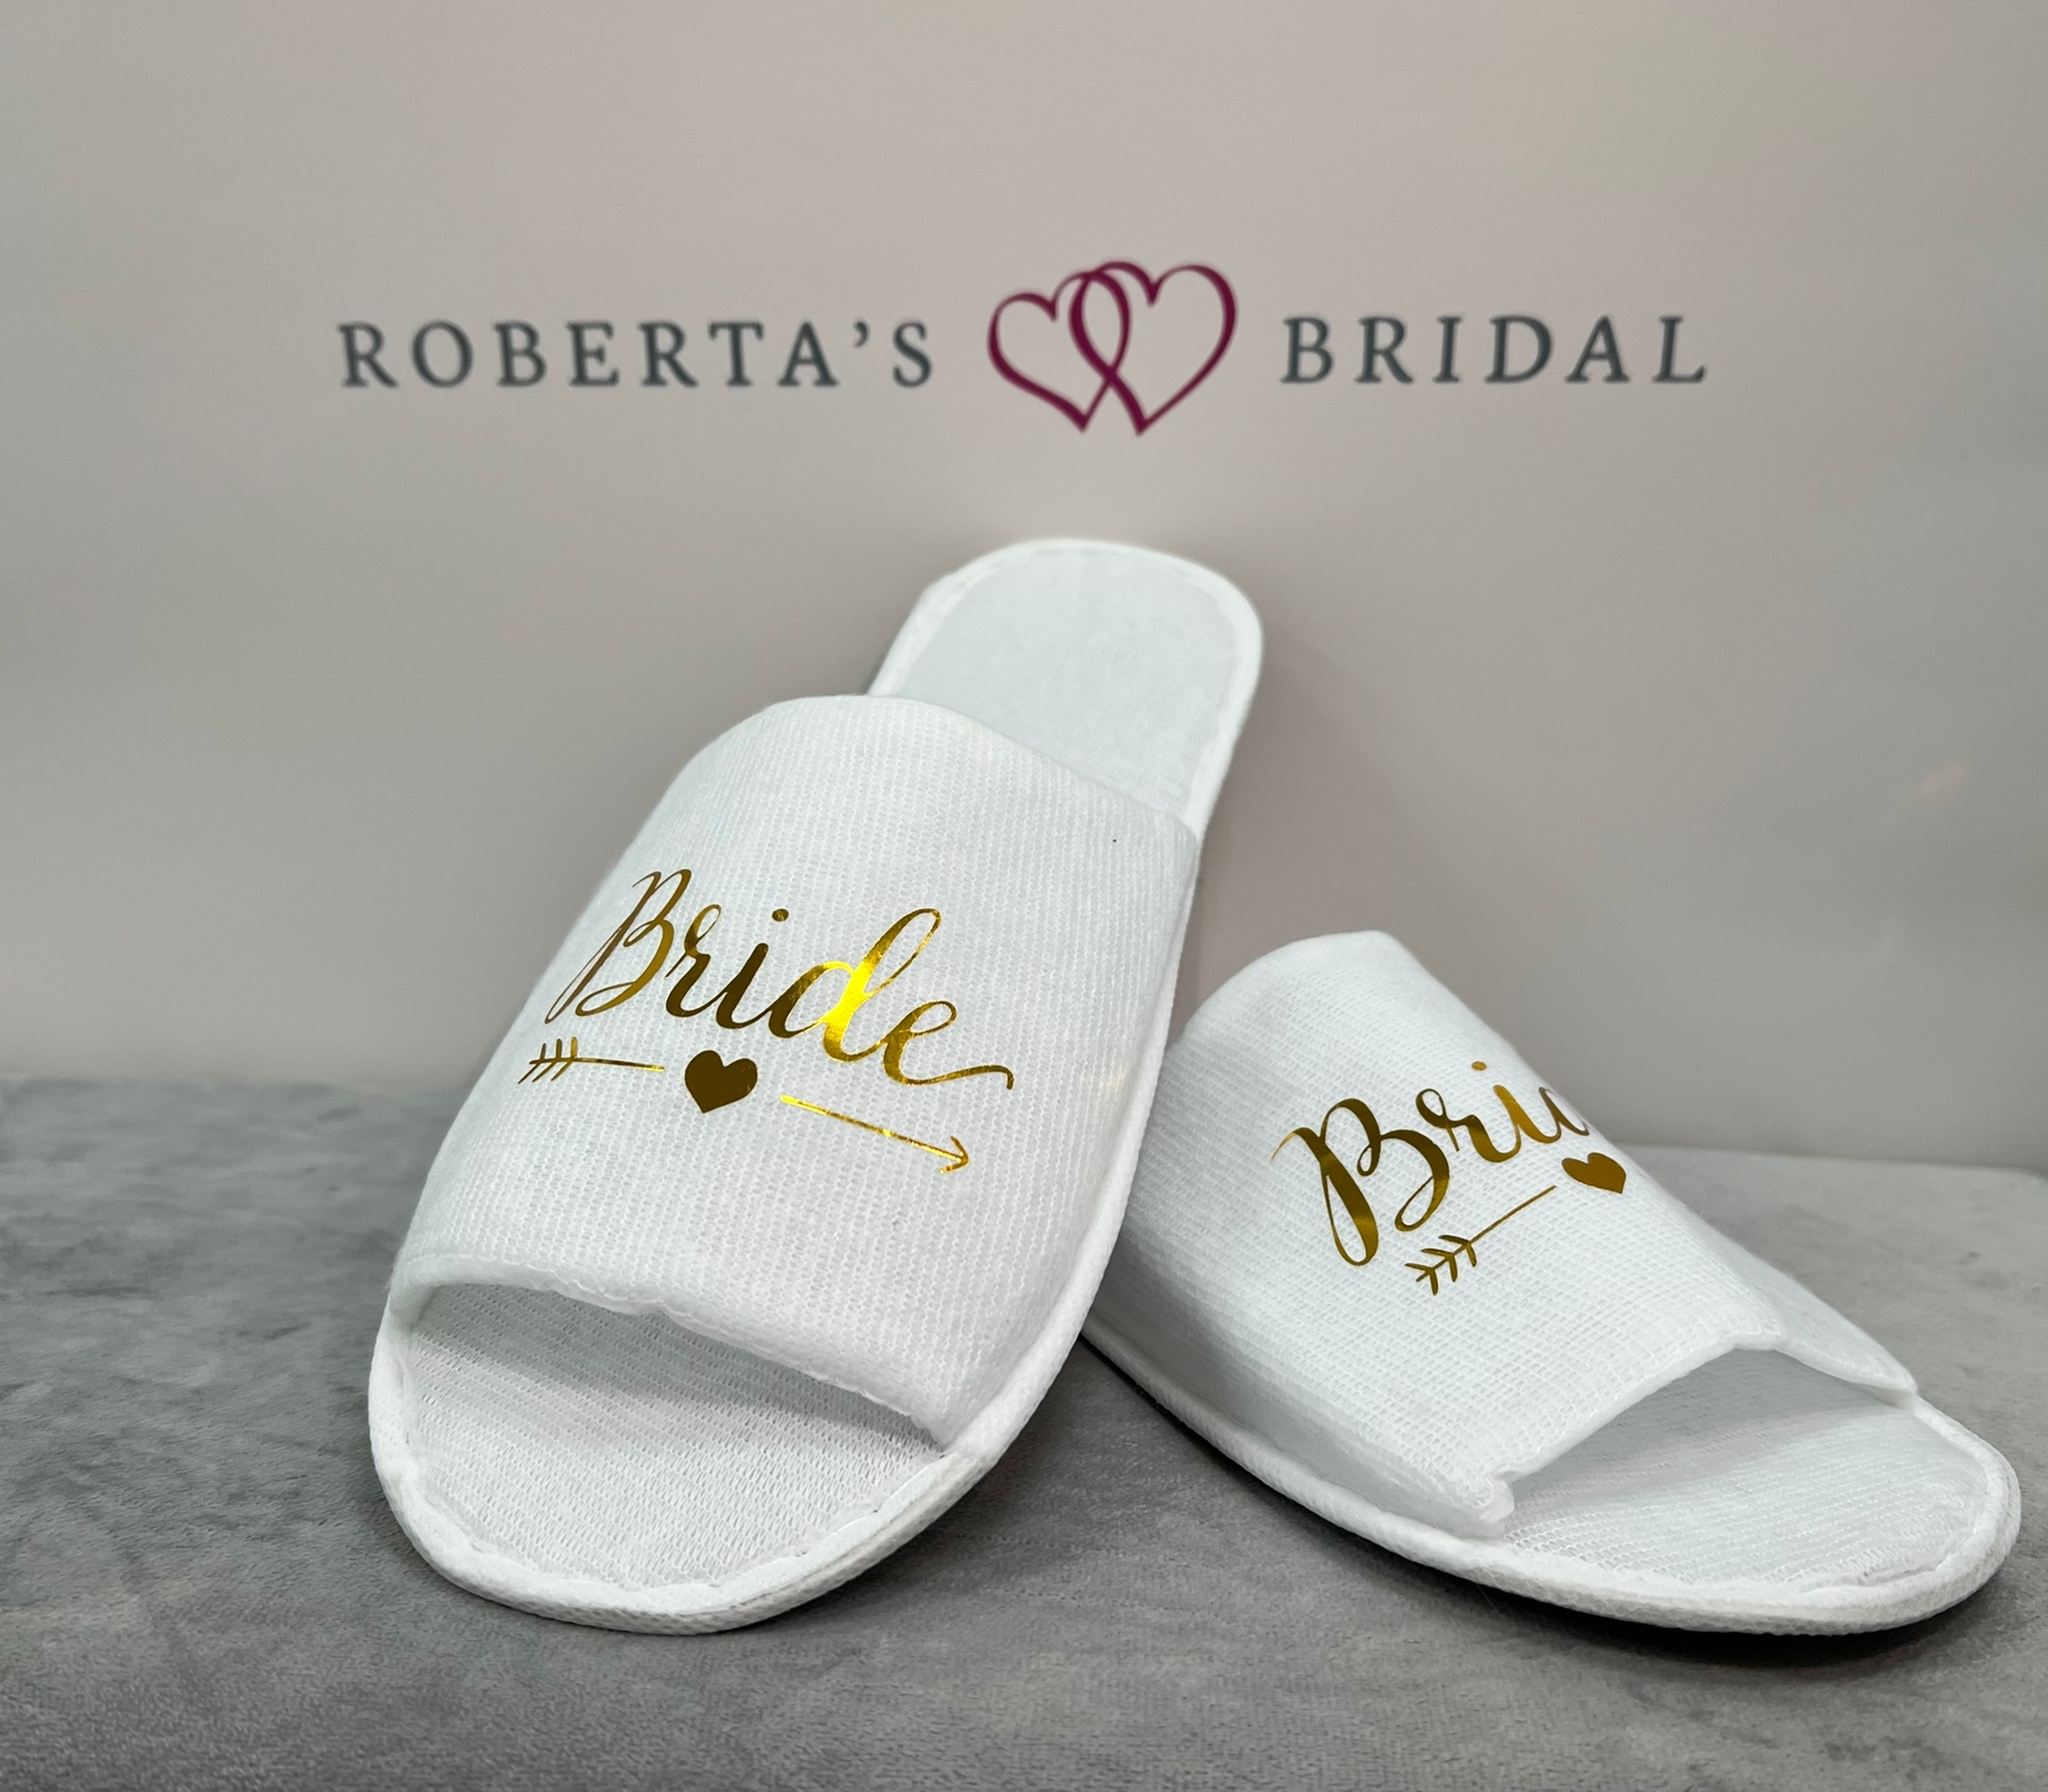 White bridal slippers for your wedding day